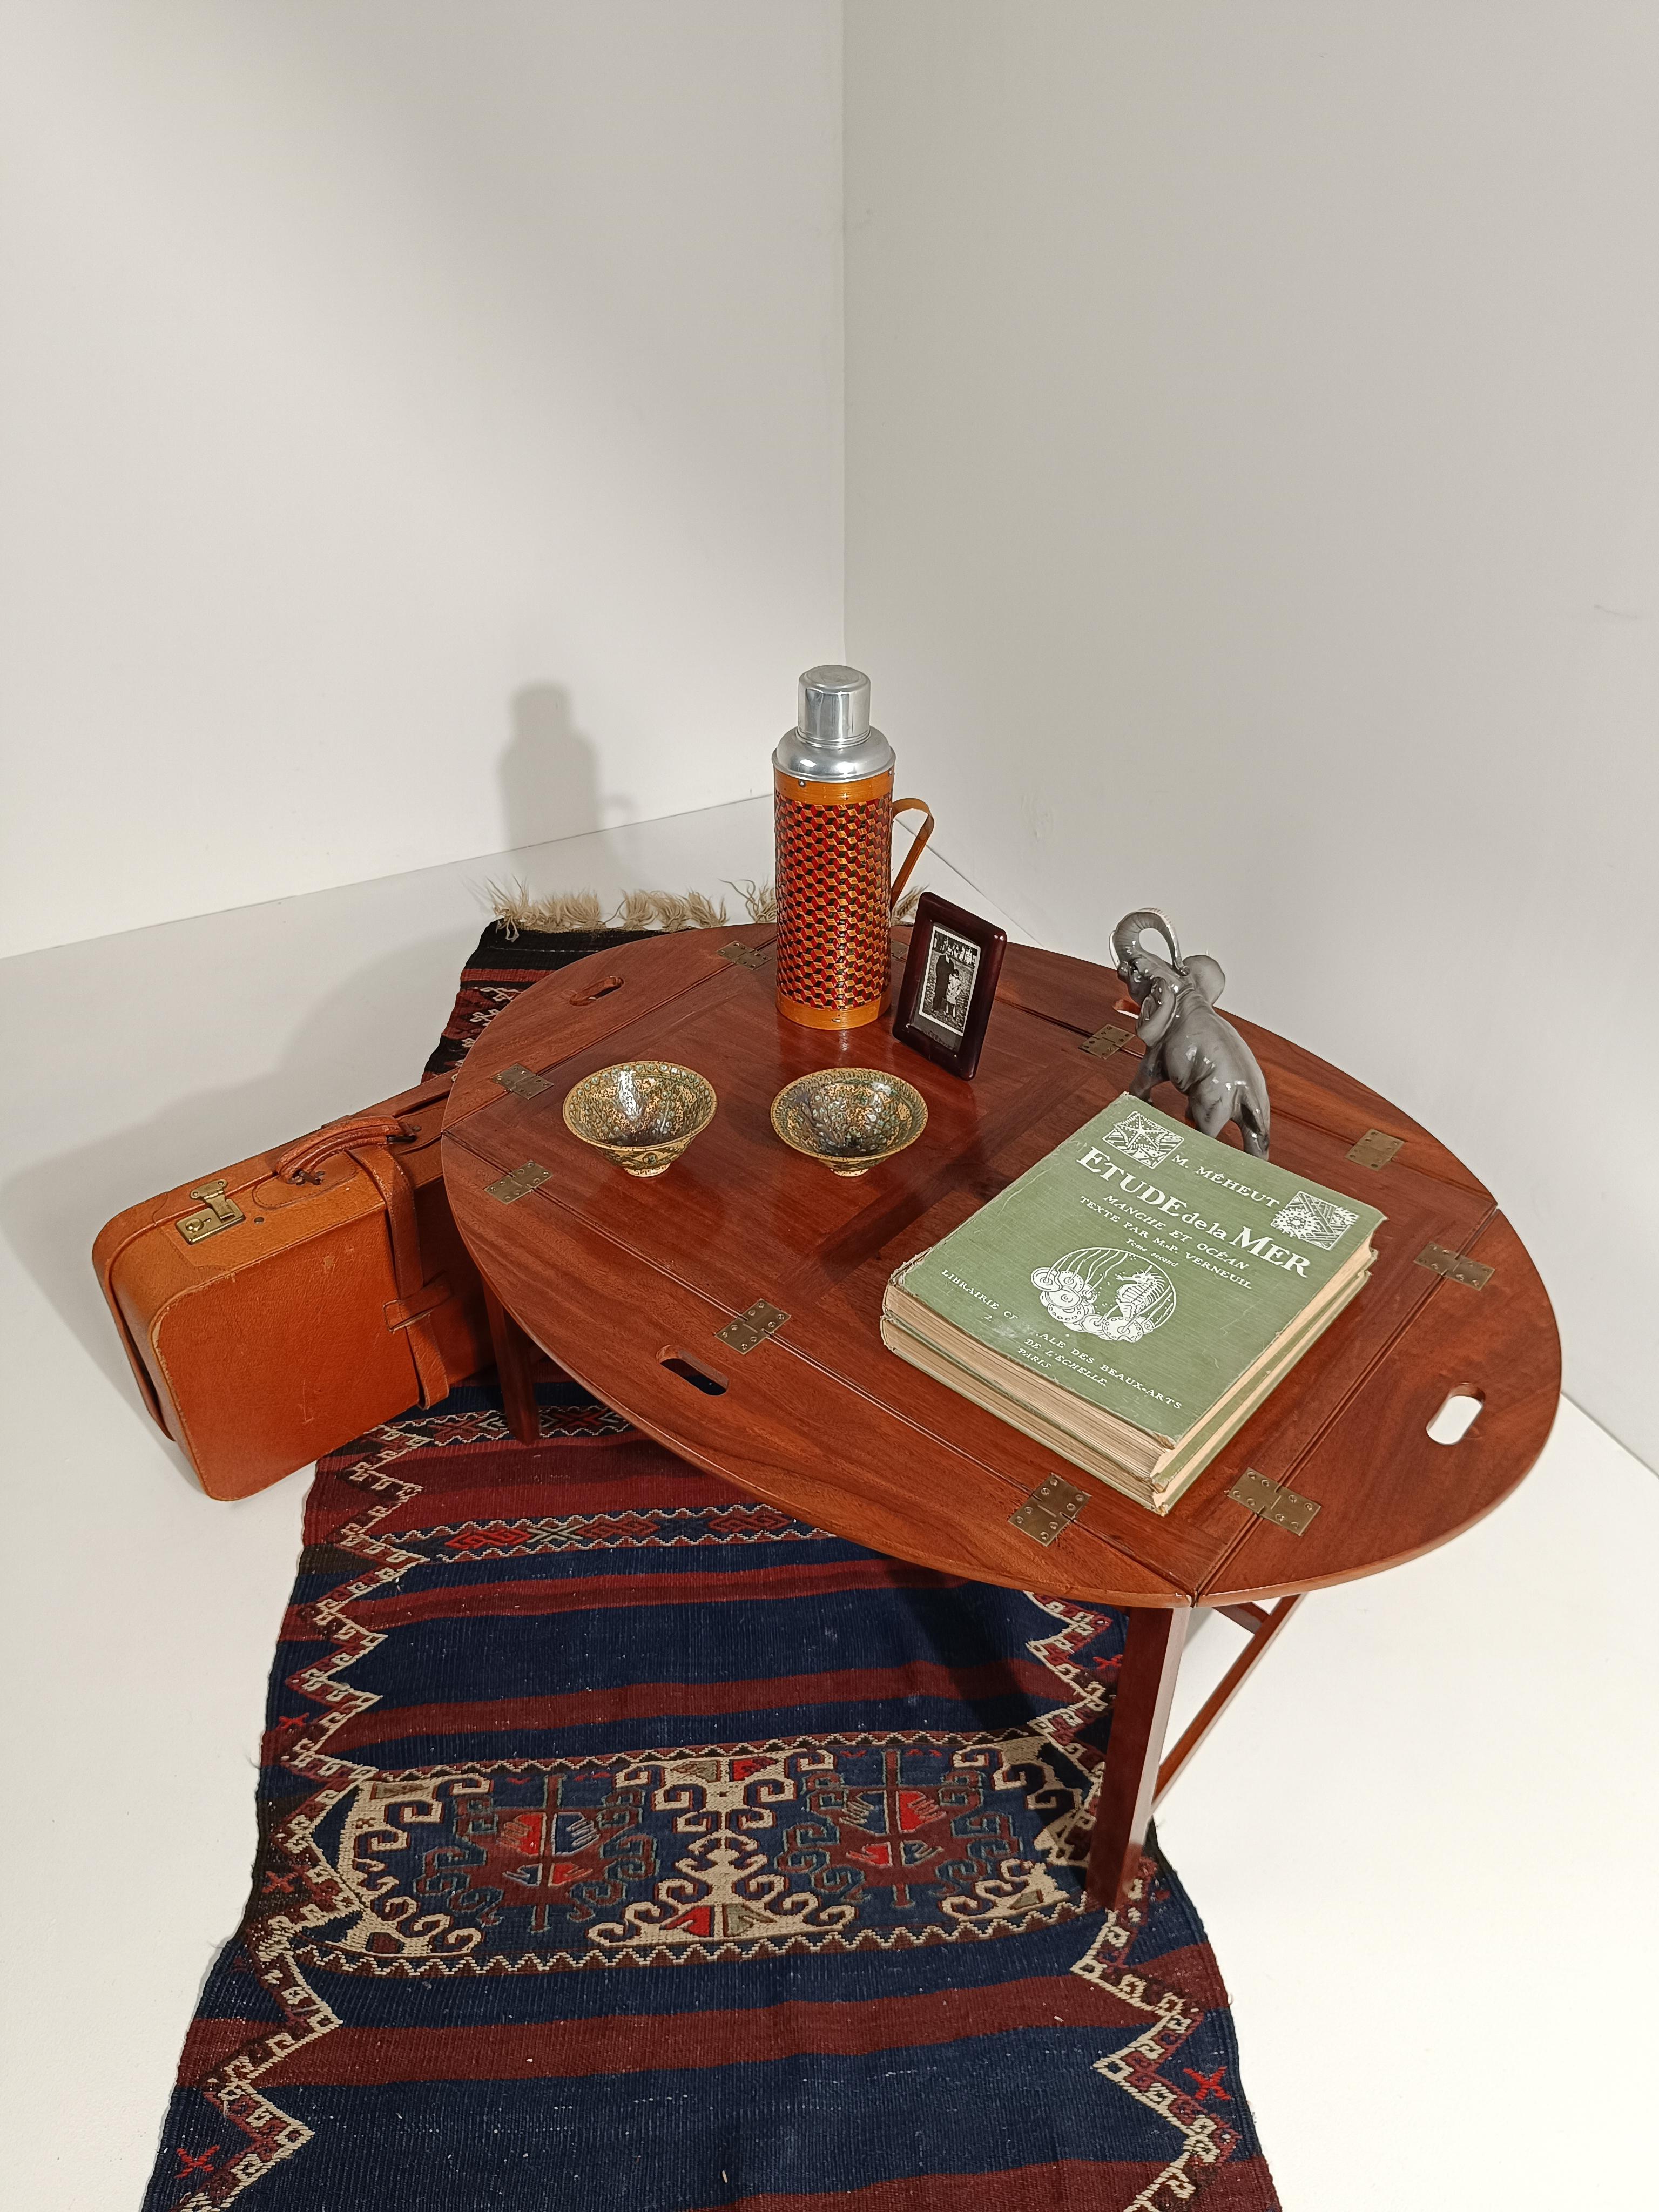 Passionate about Campaign Furnitures and travel items, we didn't miss this Butler's coffee table when we saw it on one of our client's boats moored along the Riviera D'Ulisse.
It wasn't exactly in good condition but the charm of this item was